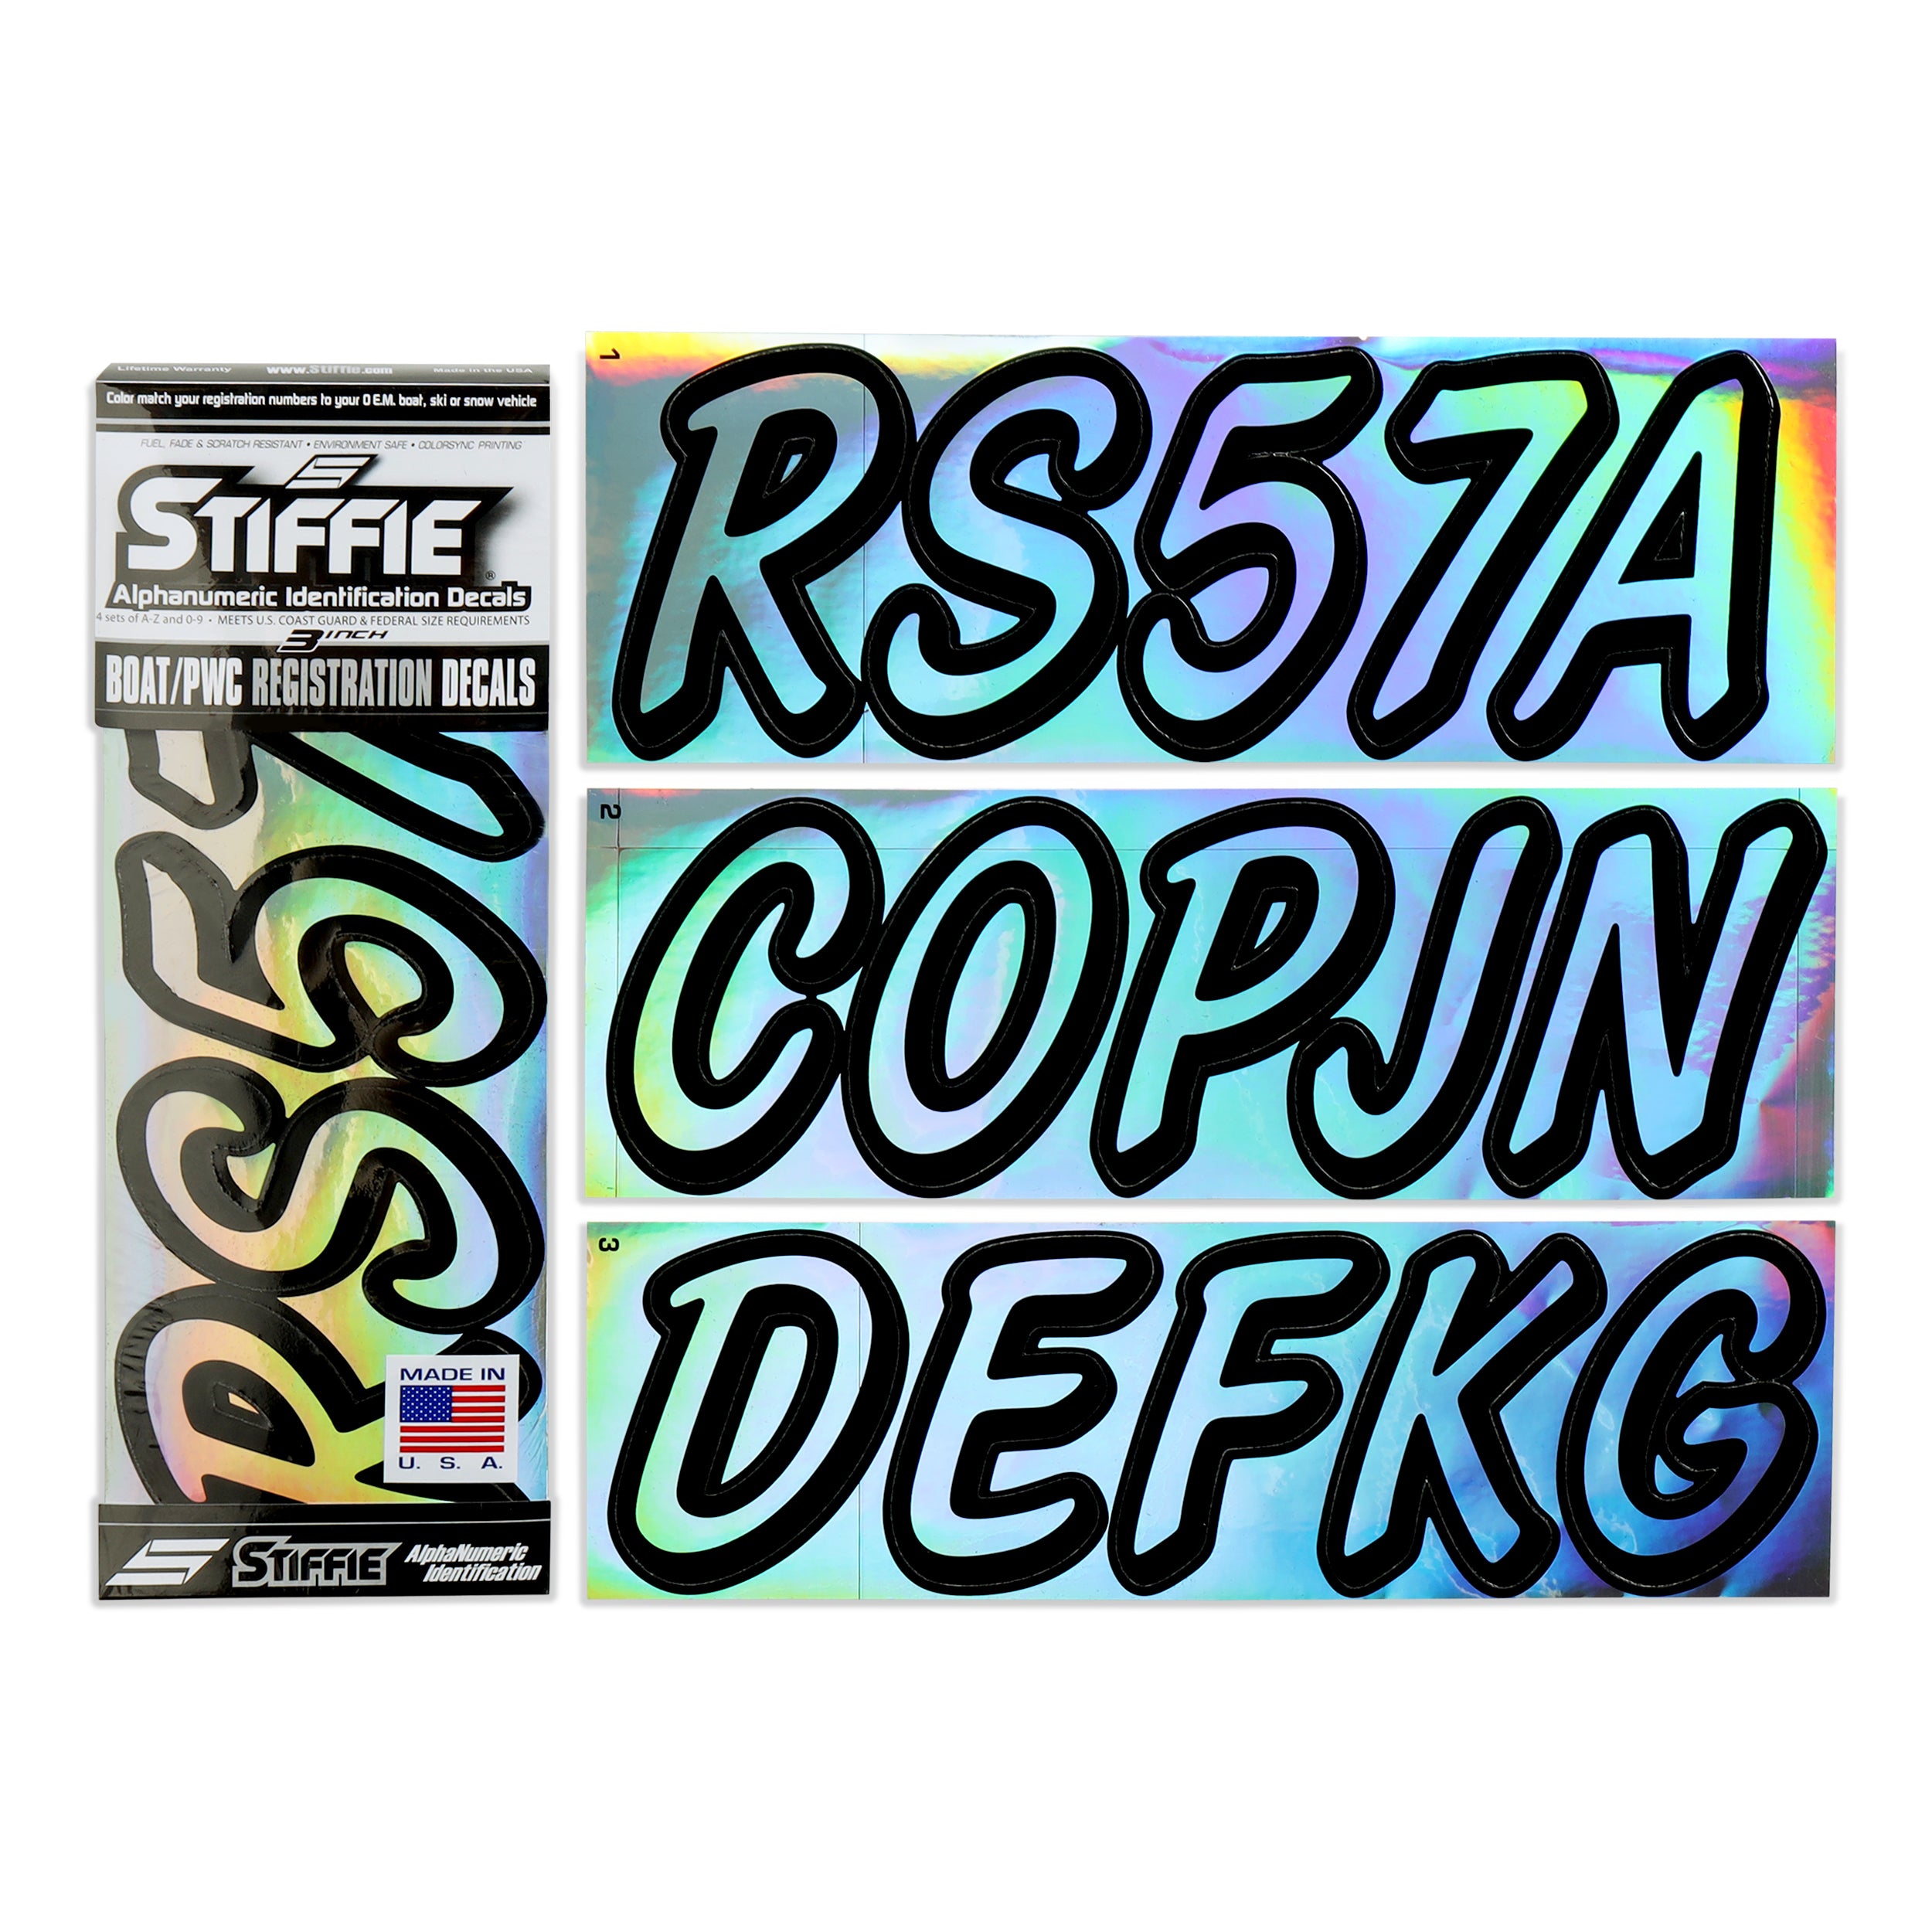 STIFFIE Whipline Solid Chrome/Black 3" Alpha-Numeric Registration Identification Numbers Stickers Decals for Boats & Personal Watercraft